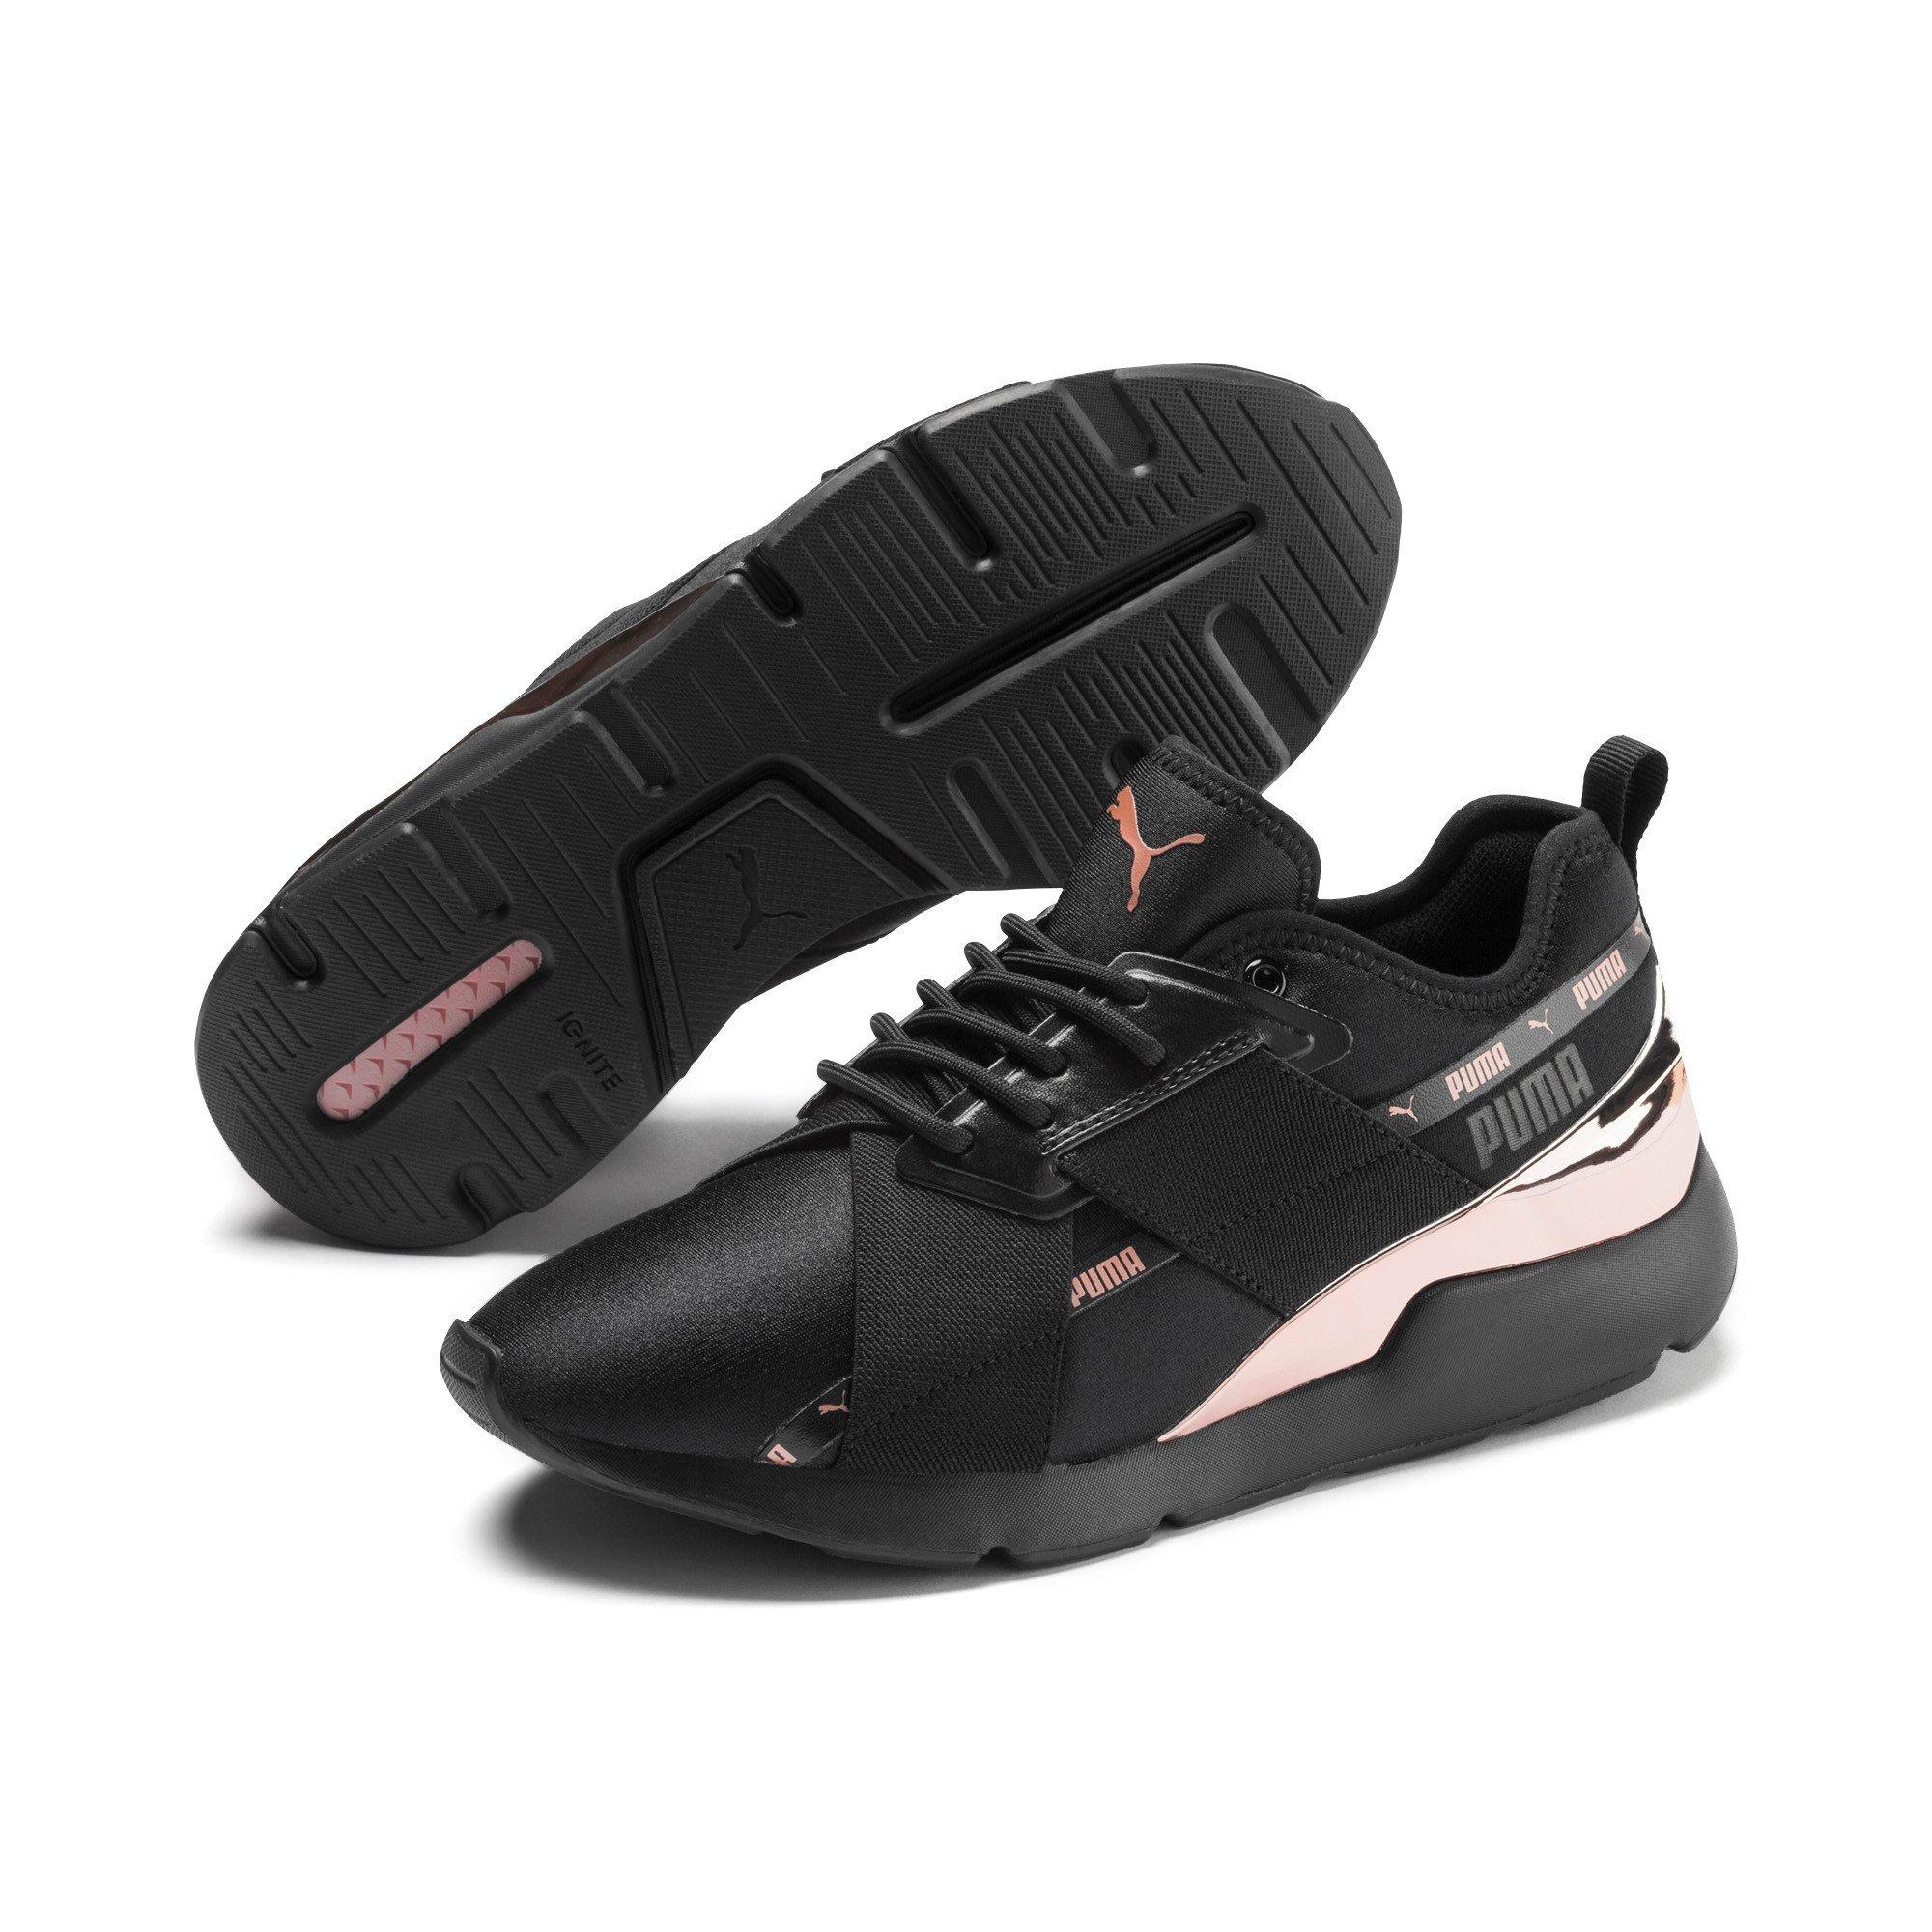 puma muse black and rose gold